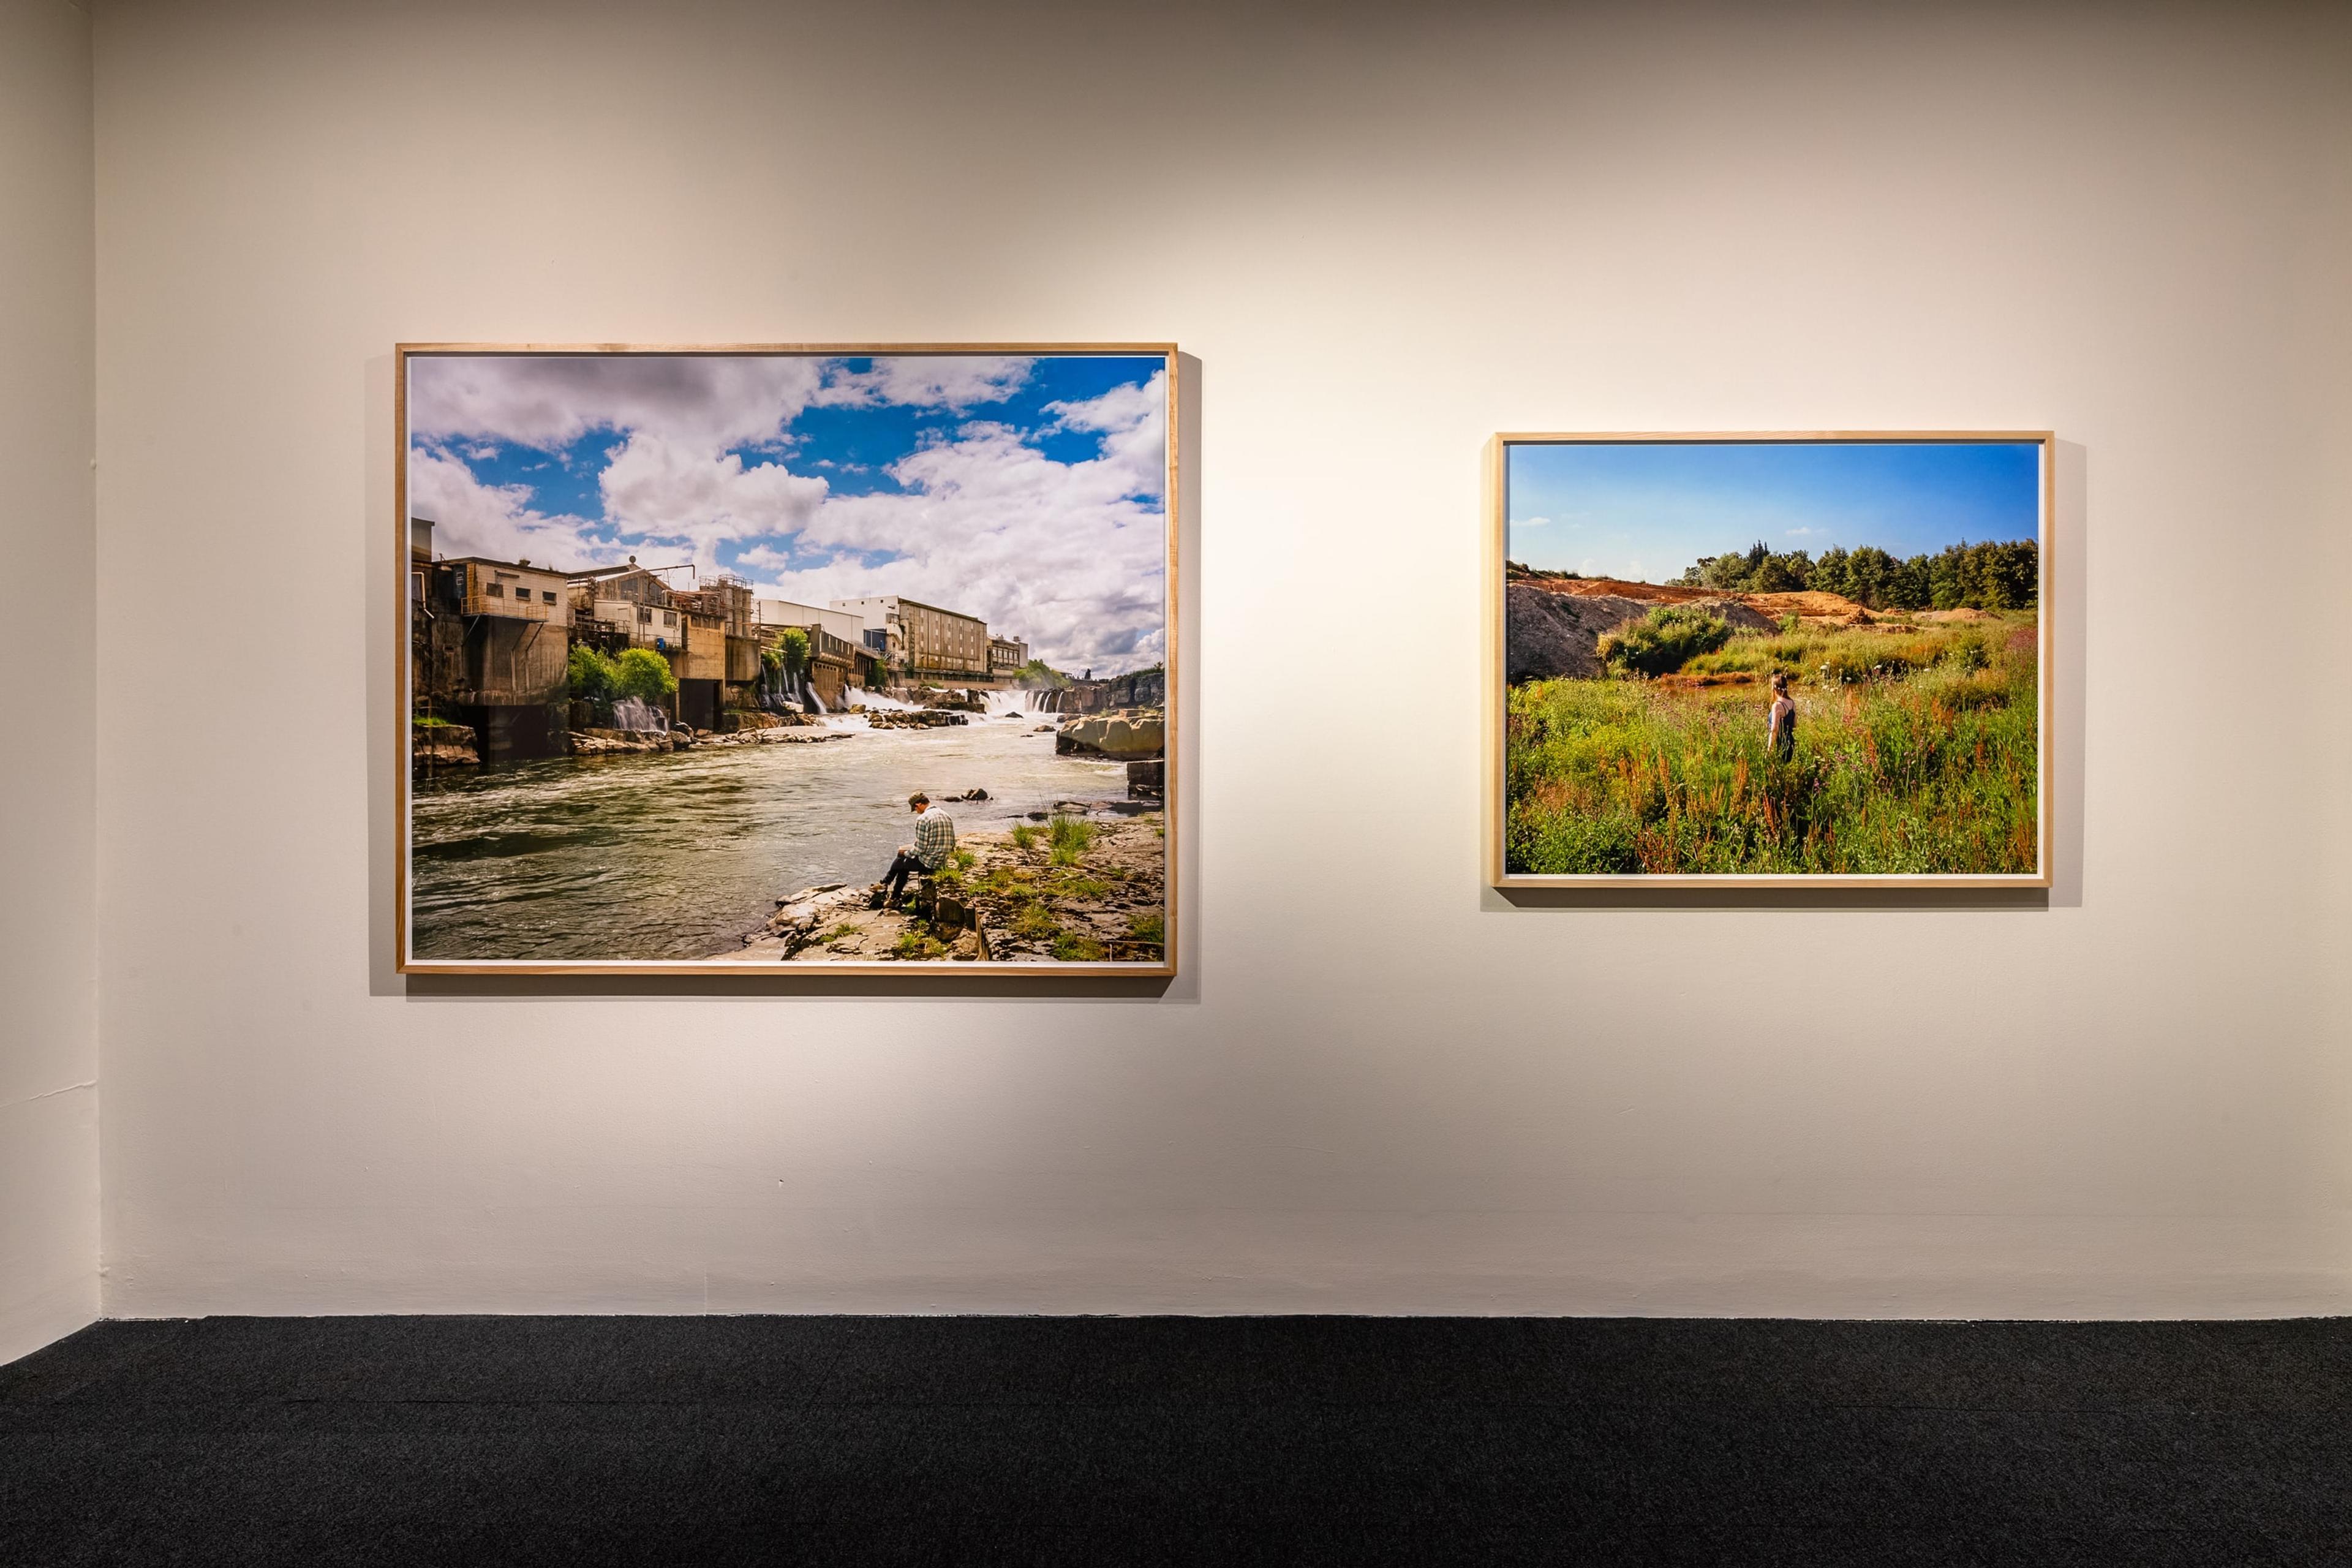 Chris Corson-Scott, A Poet Writing before the Falls and Freezing Work, Mataura, 2016, archival pigment print, 1400 × 1700mm; and Wildflowers in a Housing Development, Katikati, Bay of Plenty, 2015, archival pigment print, 1100 × 1350mm. Courtesy of the artist and Trish Clark Gallery, Auckland. Installation view, Tēnei Ao Tūroa – This Enduring World, Te Pātaka Toi Adam Art Gallery, Victoria University Wellington. Photo: Ted Whitaker